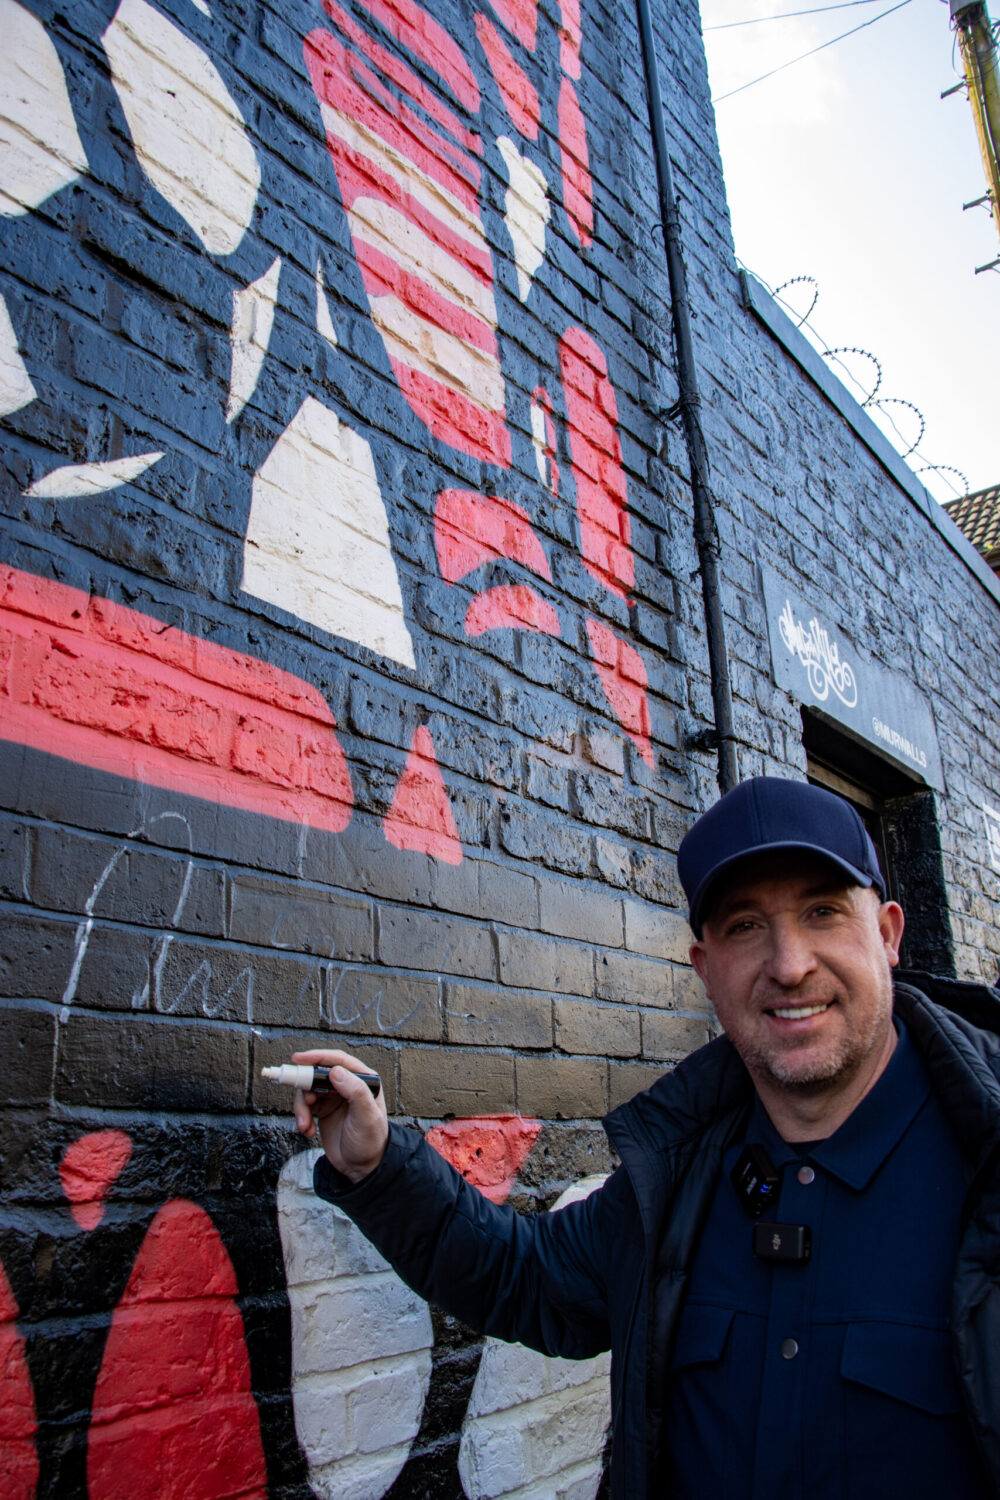 Robbie Fowler and the Anfield mural. Credit: Courtney Neary